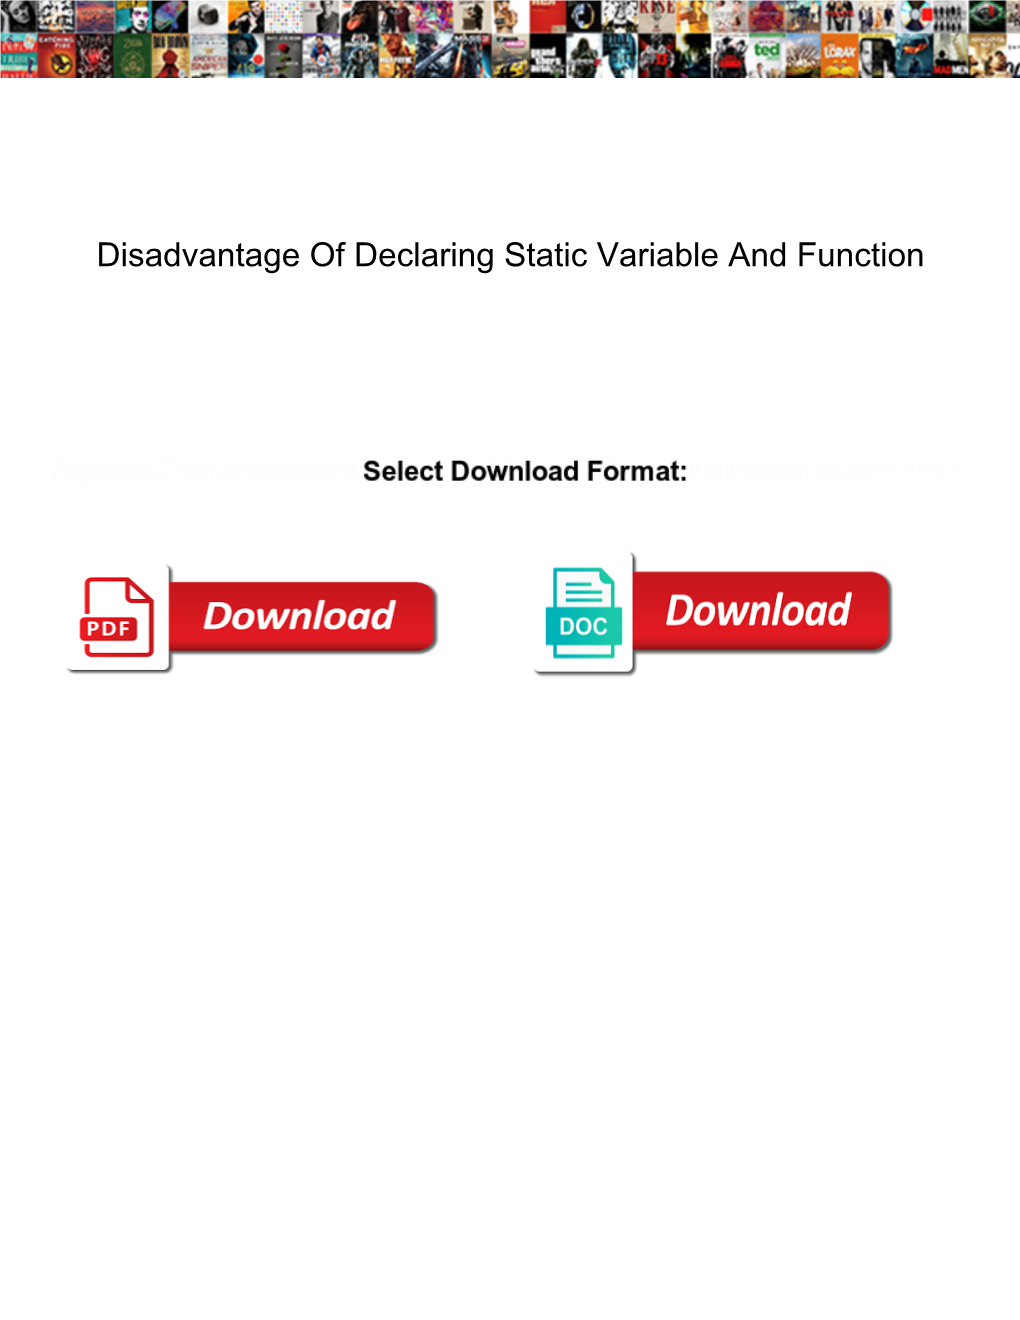 Disadvantage of Declaring Static Variable and Function